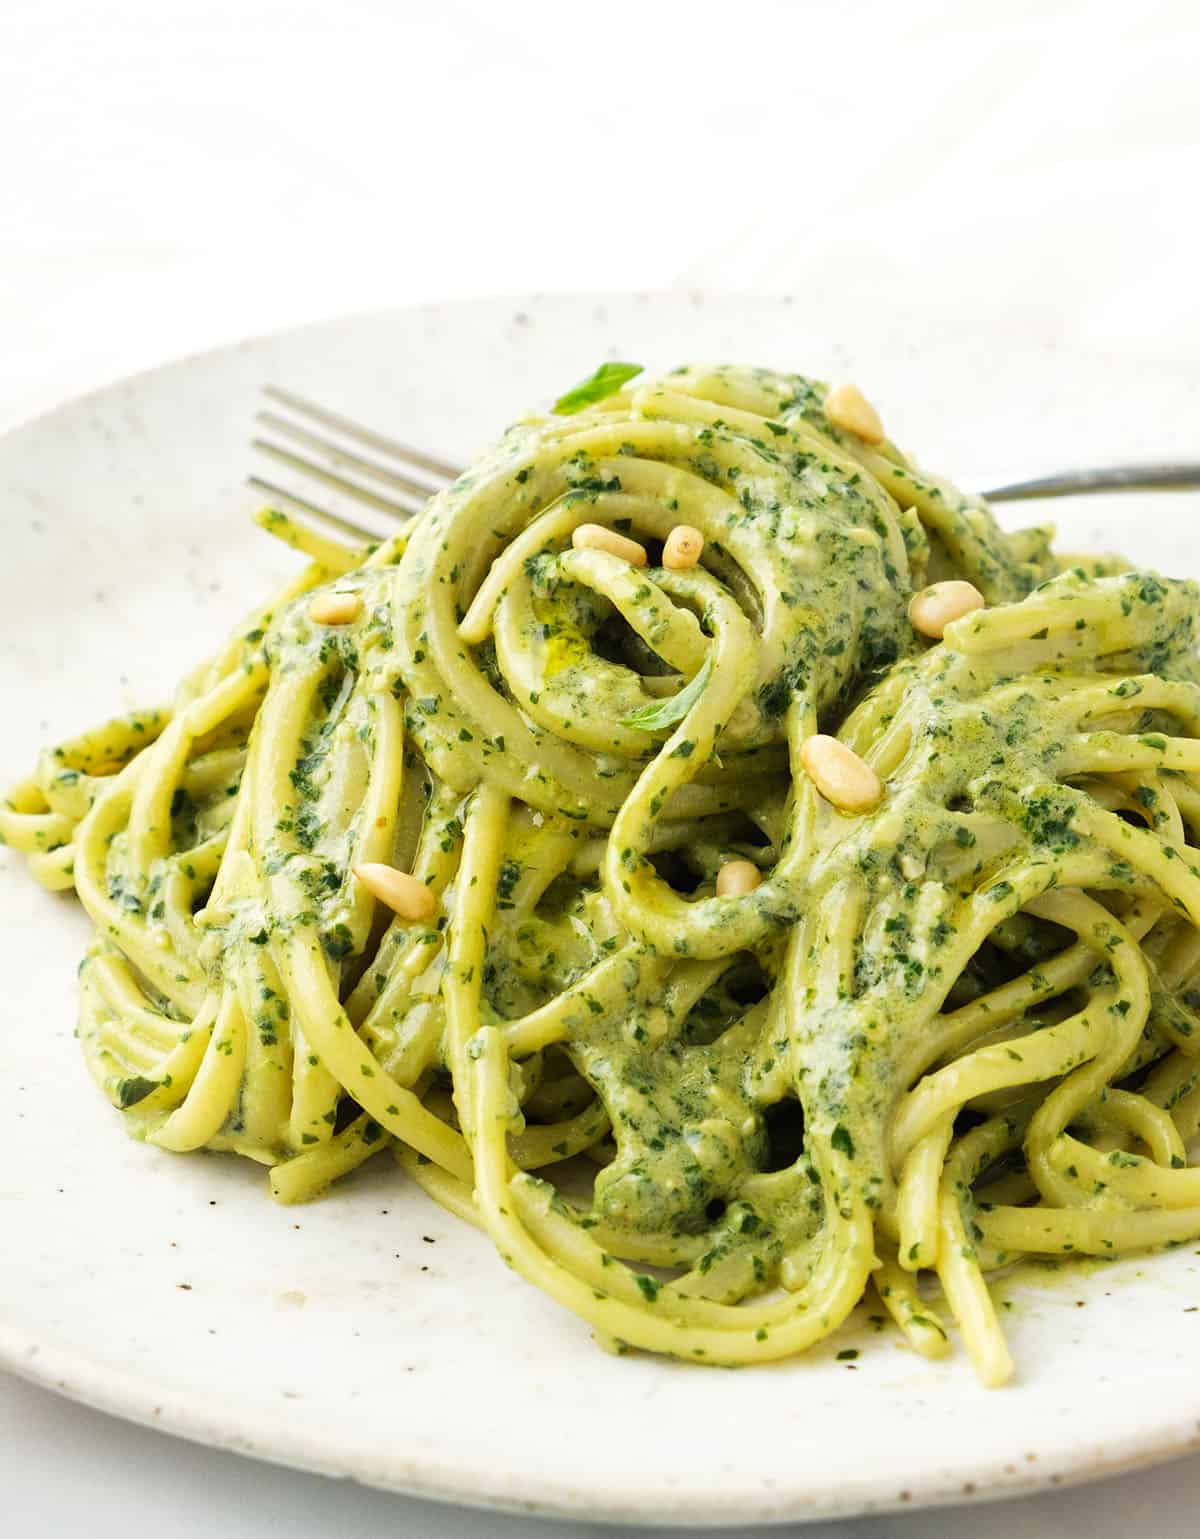 15+ Dreamy Creamy Pasta Recipes - The clever meal